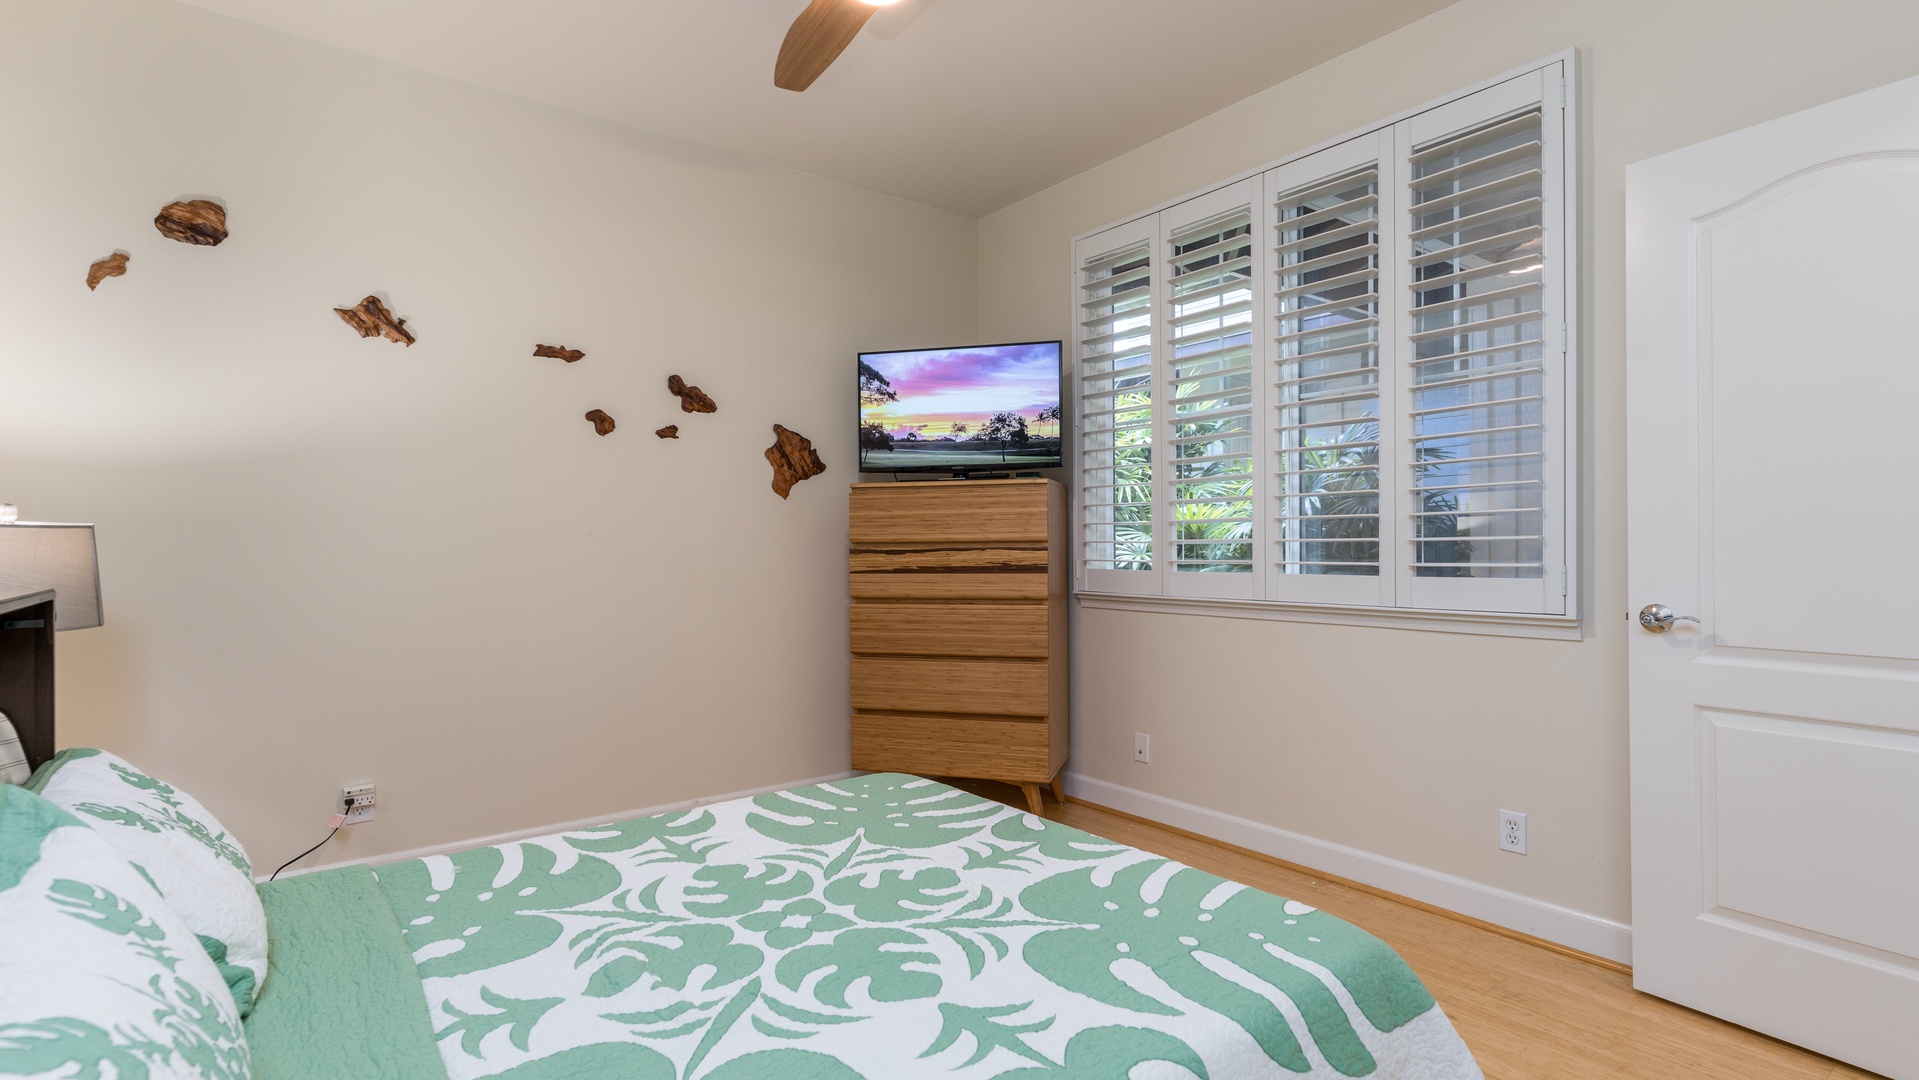 Kapolei Vacation Rentals, Ko Olina Kai 1083C - The downstairs guest bedroom with TV and scenery.